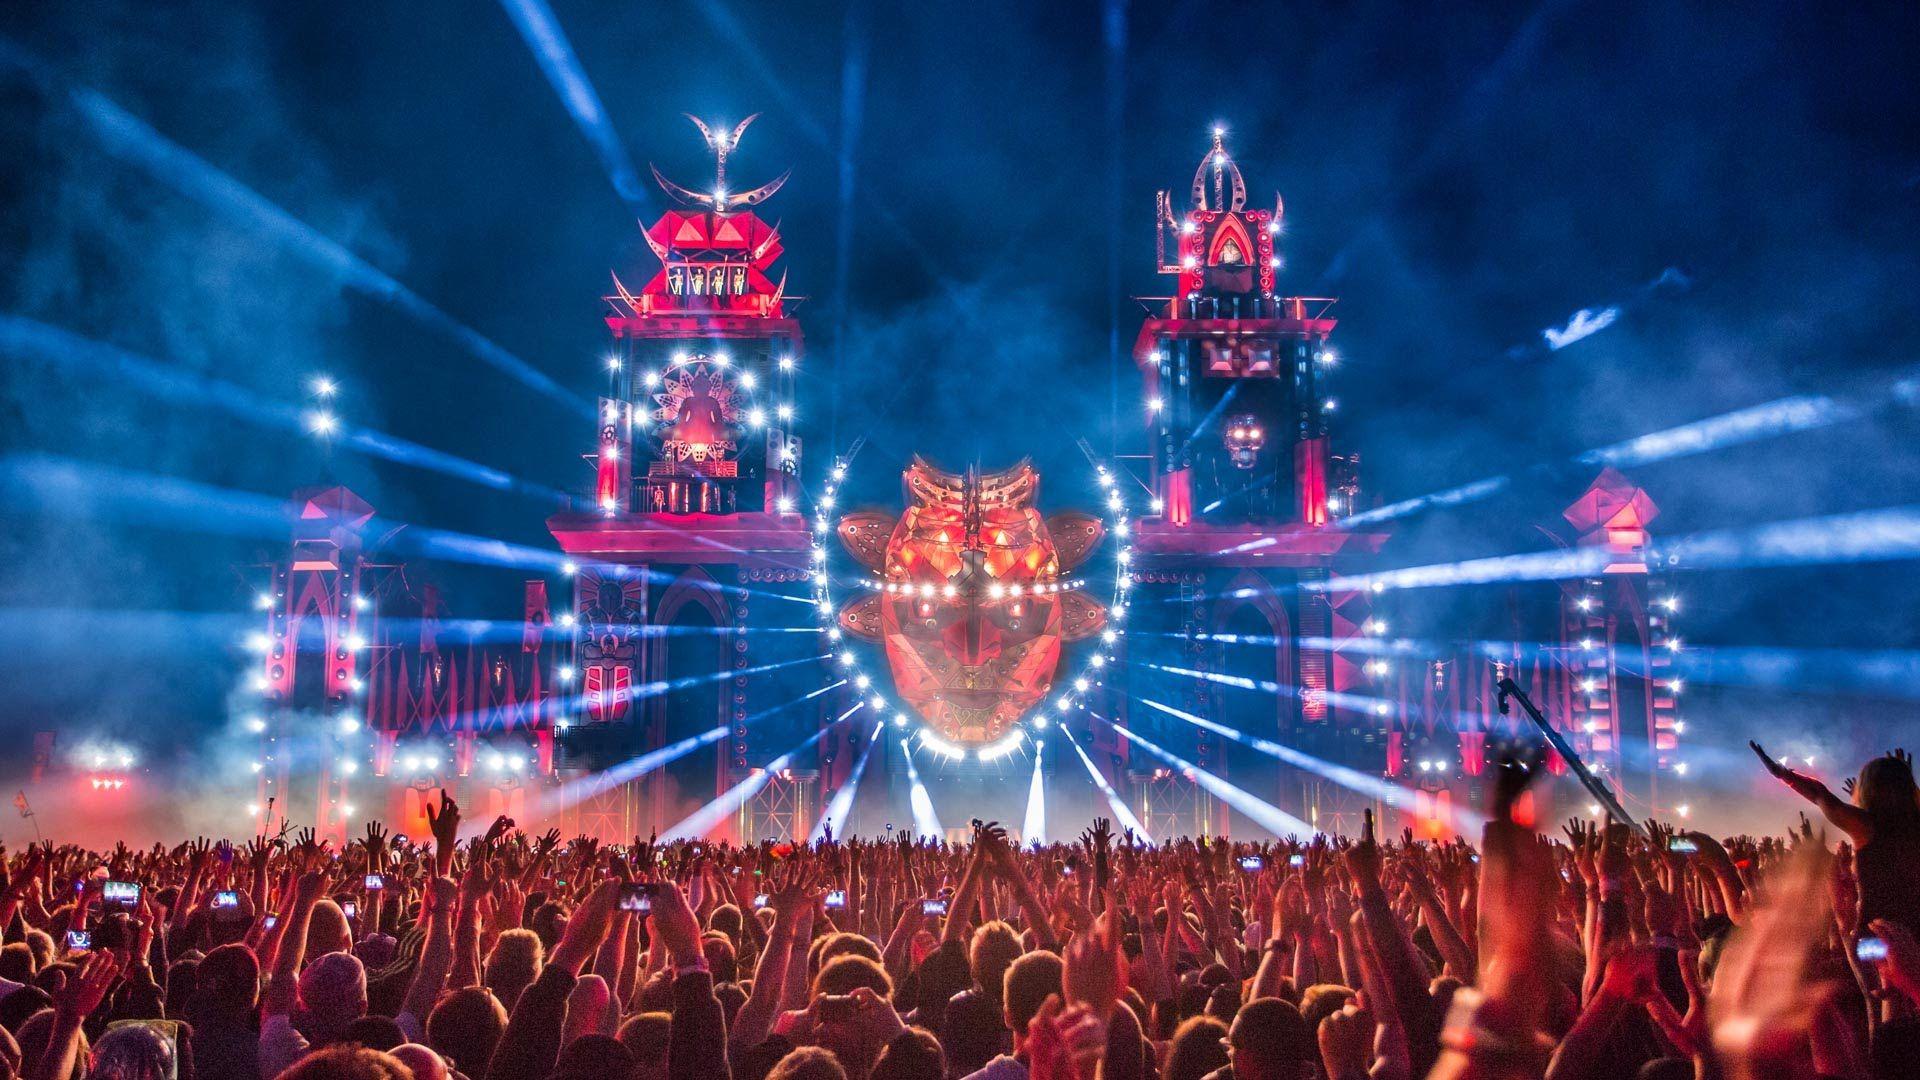 Defqon.1 Festival 2014. The Closing & Endshow on Sunday